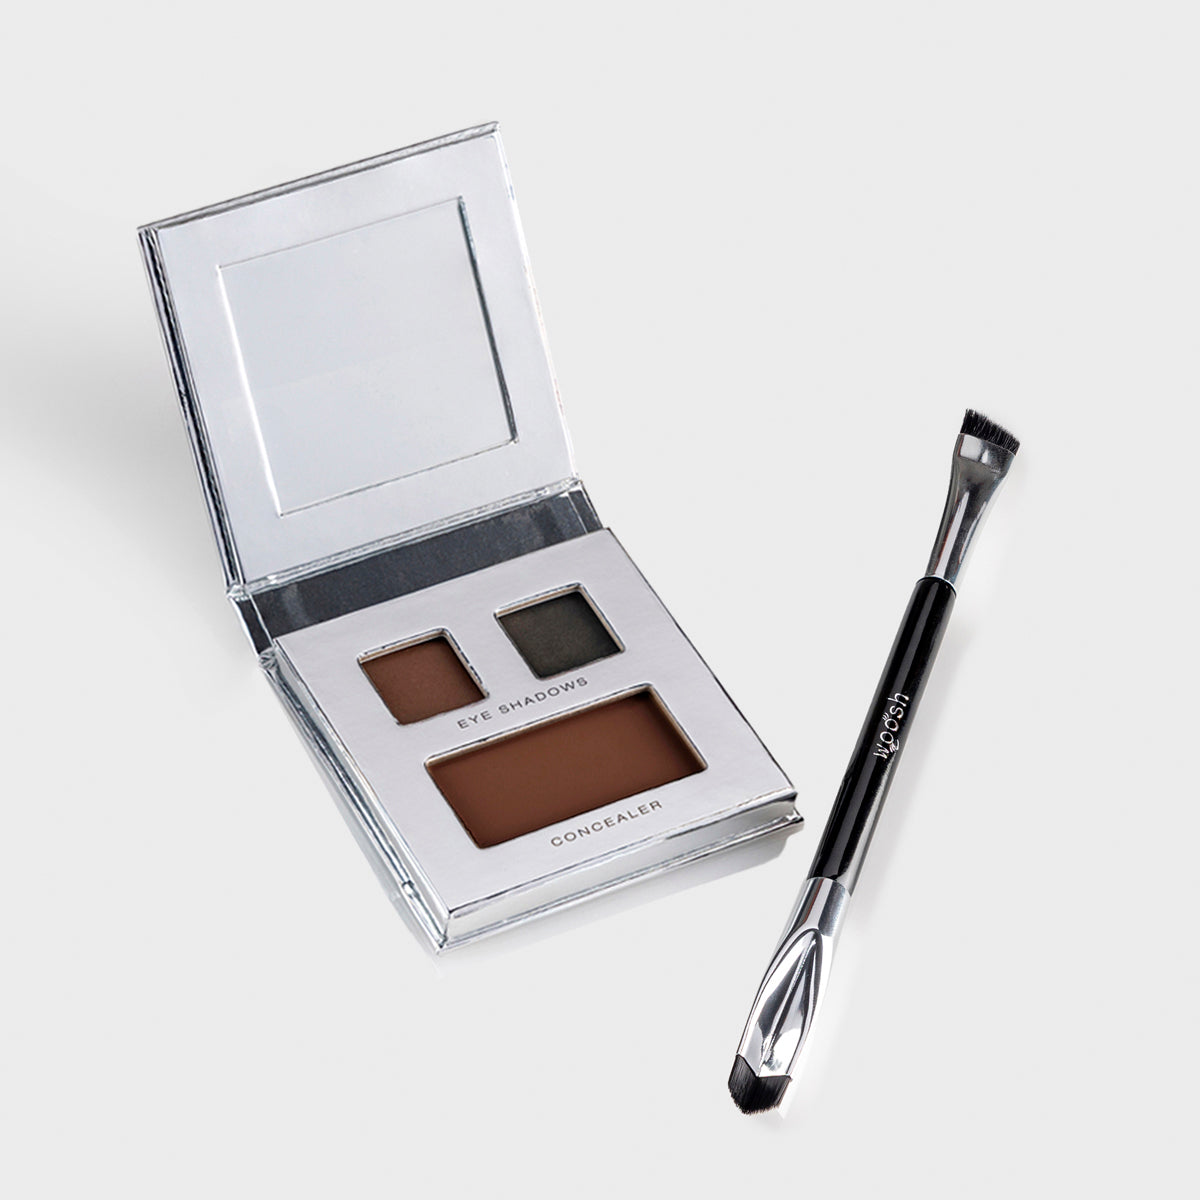 Smokey Eye Palette with two eyeshadows and one concealer with the Corner Brush